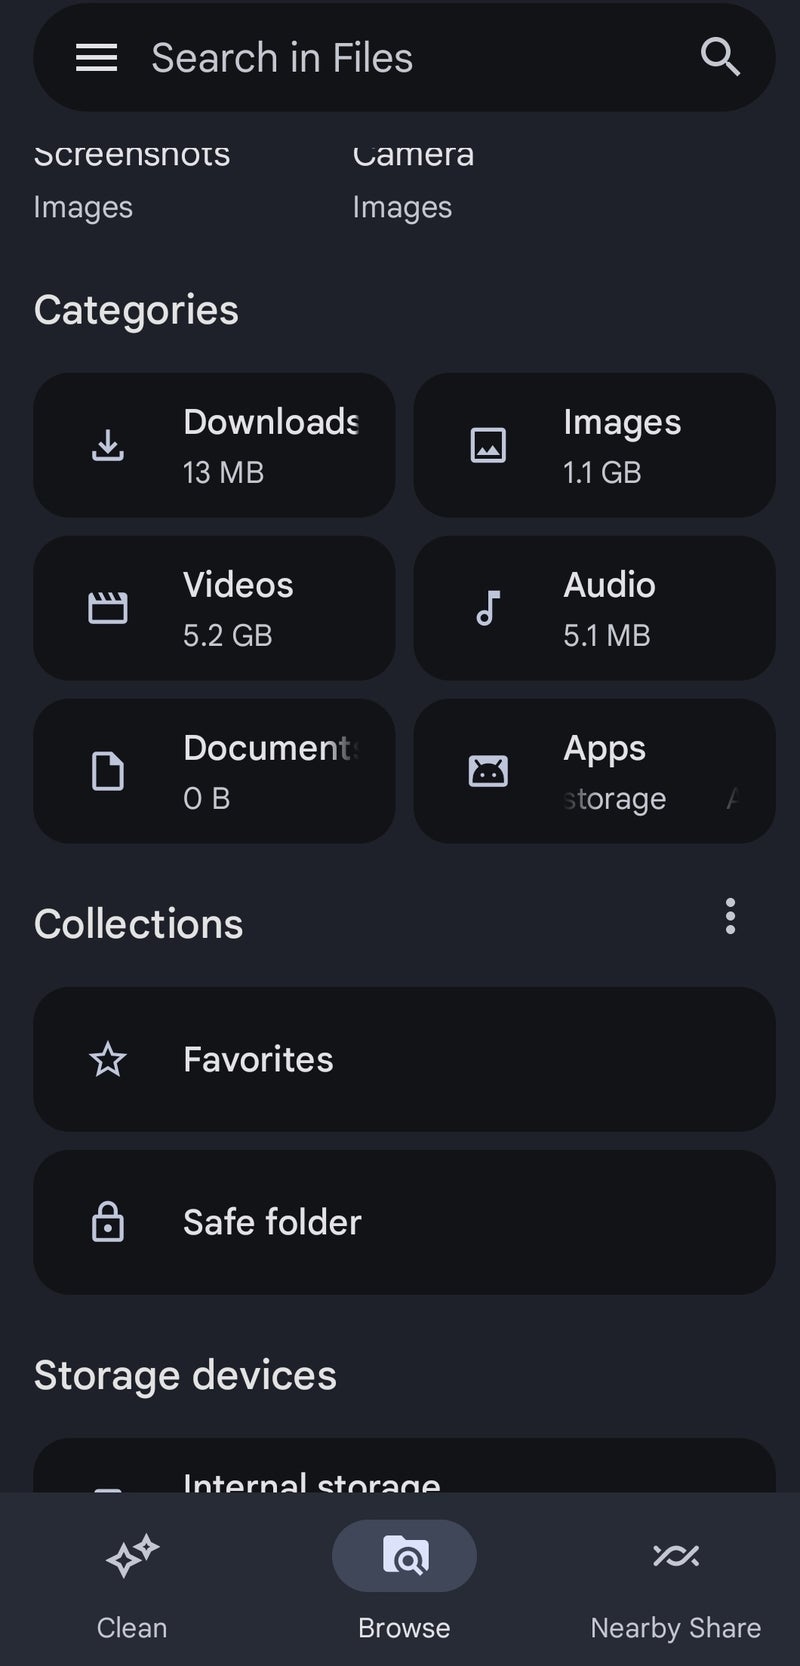 With it, you can easily organize your downloads into various folders